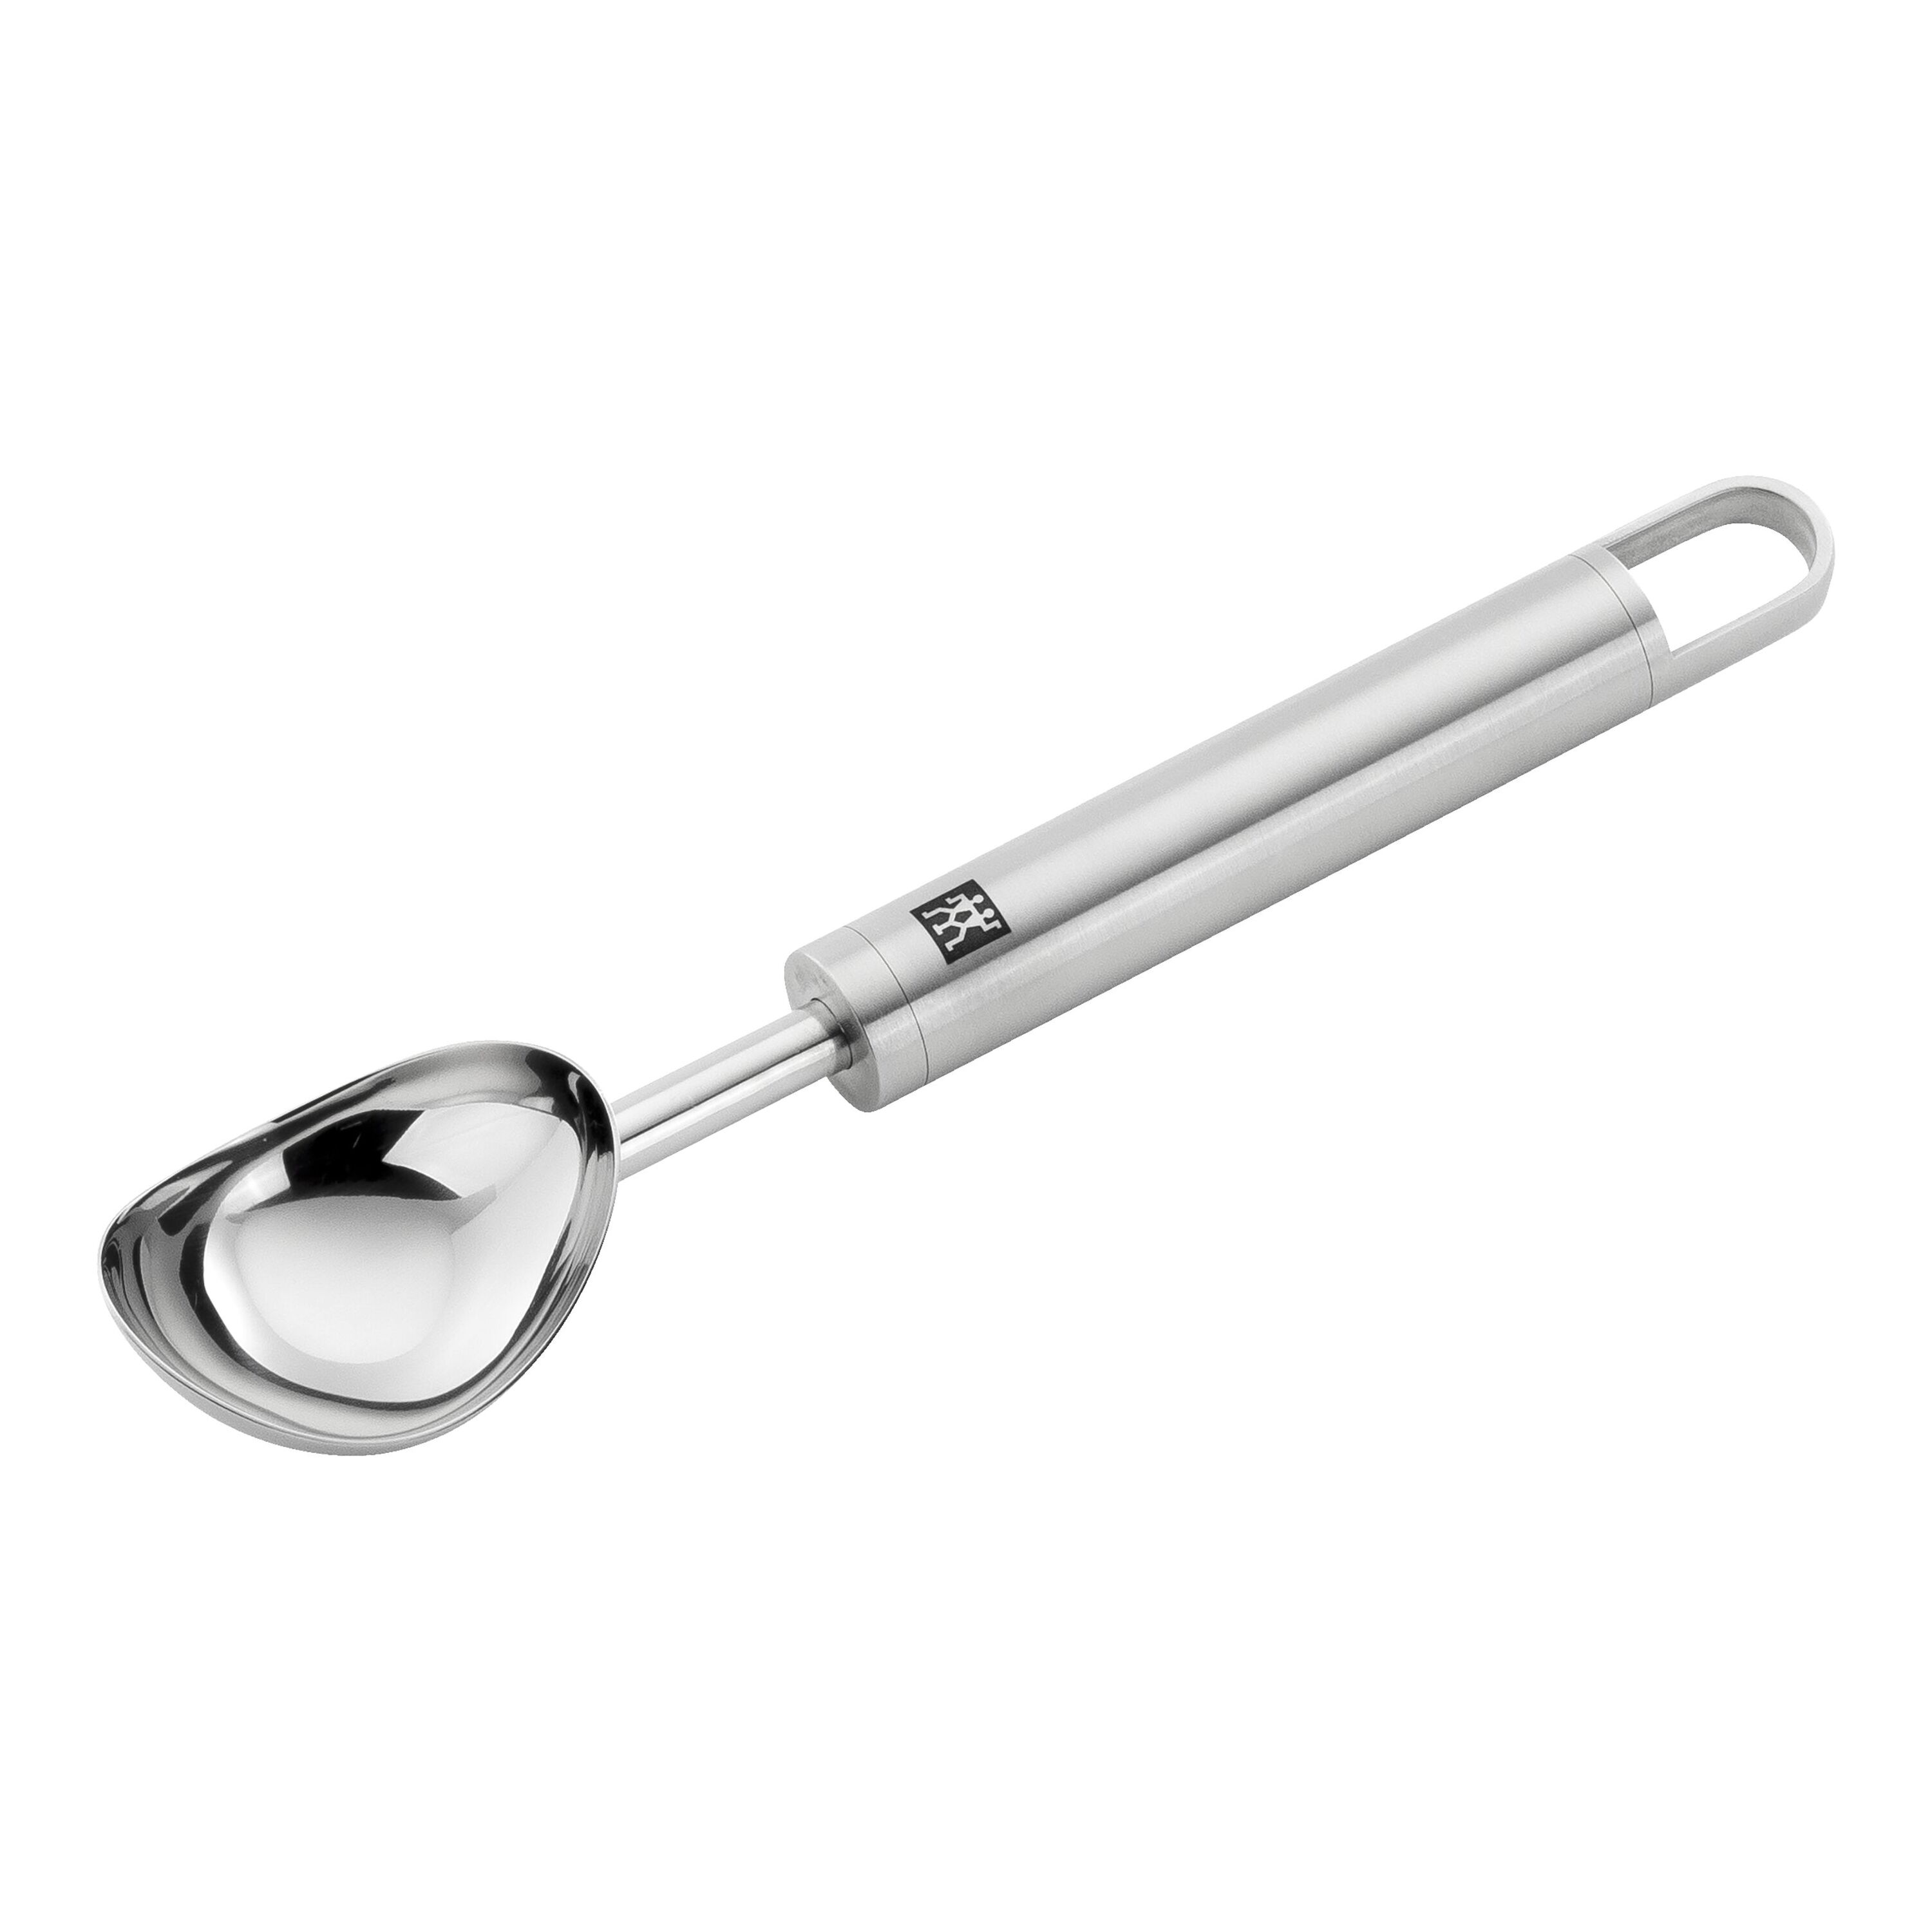 Social Chef Stainless Steel Cookie Scoop - Small Cookie Dough Scooper for  Perfec